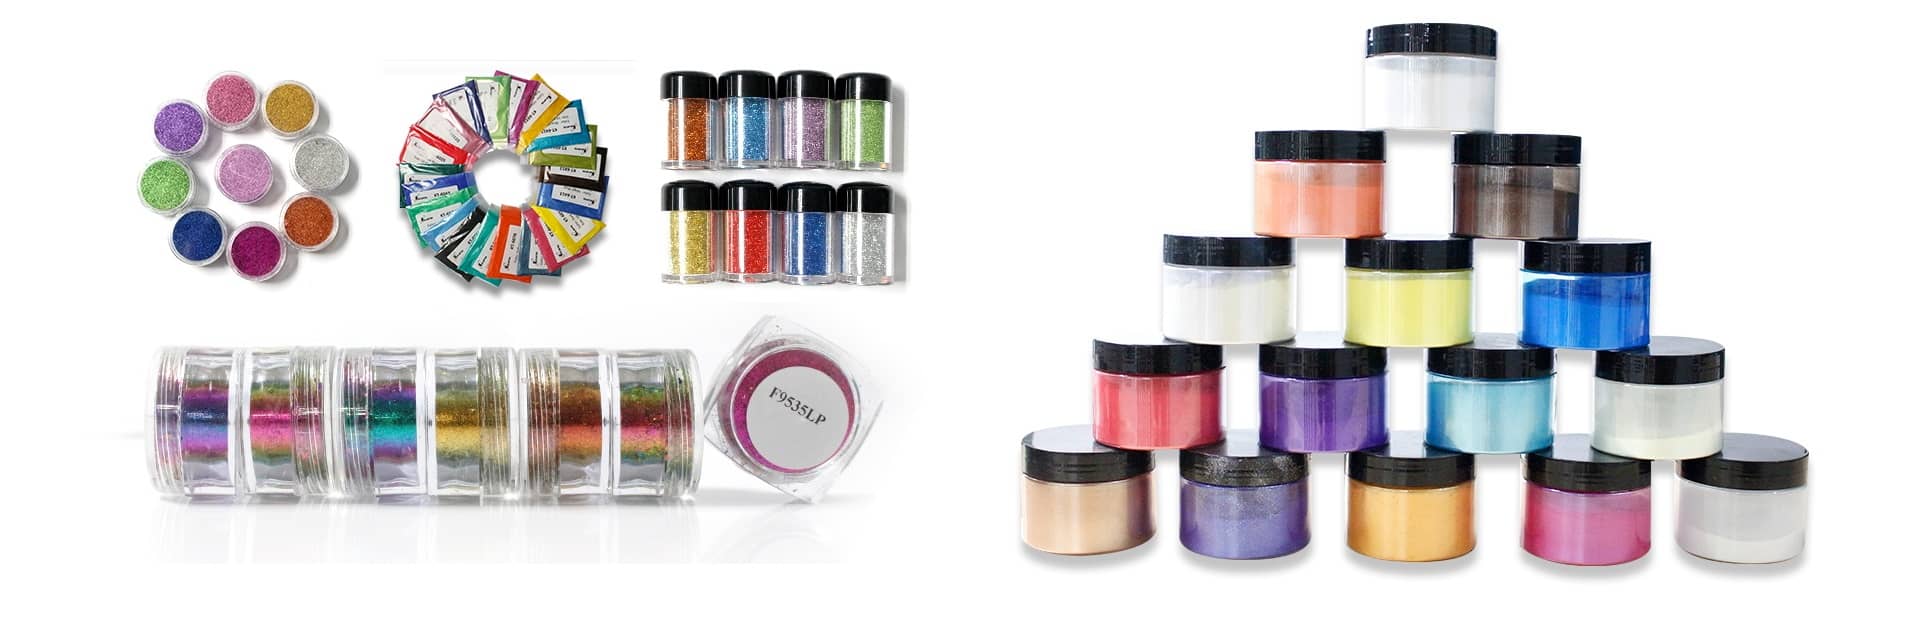 China Nail Polish Suppliers China Factory and Suppliers - Manufacturers  Pricelist | NEW COLOR BEAUTY